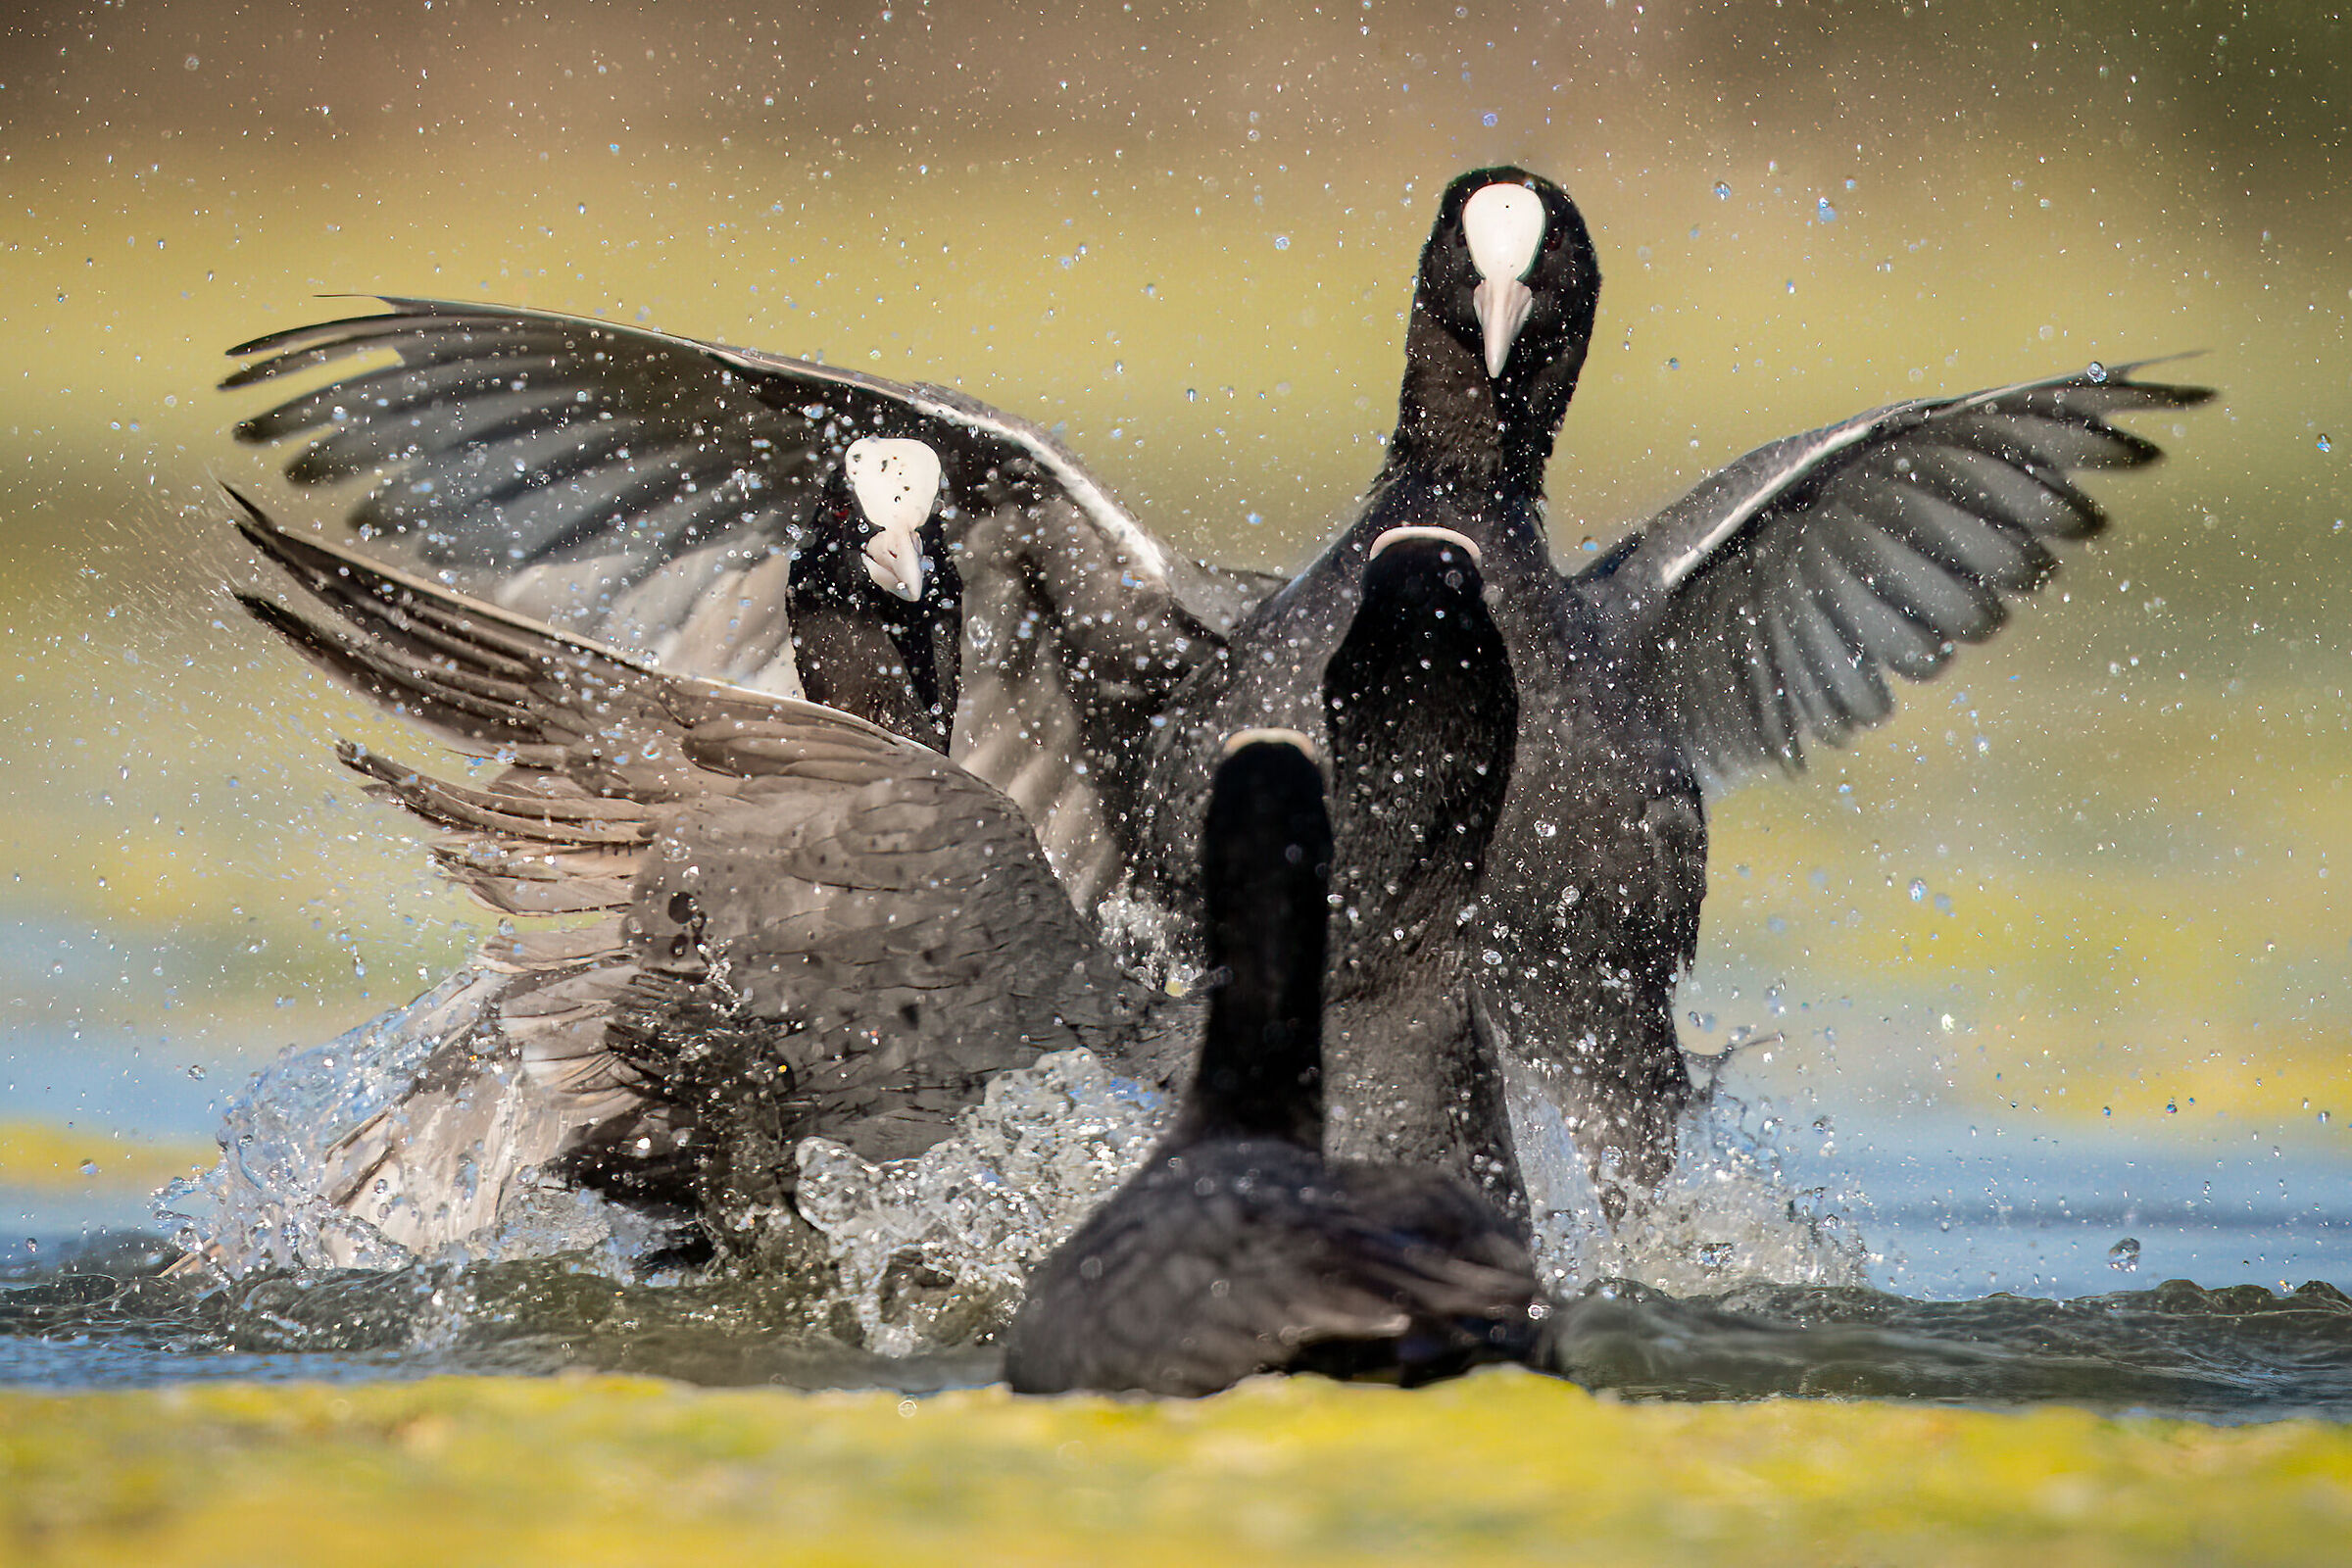 Skirmishes between coots...